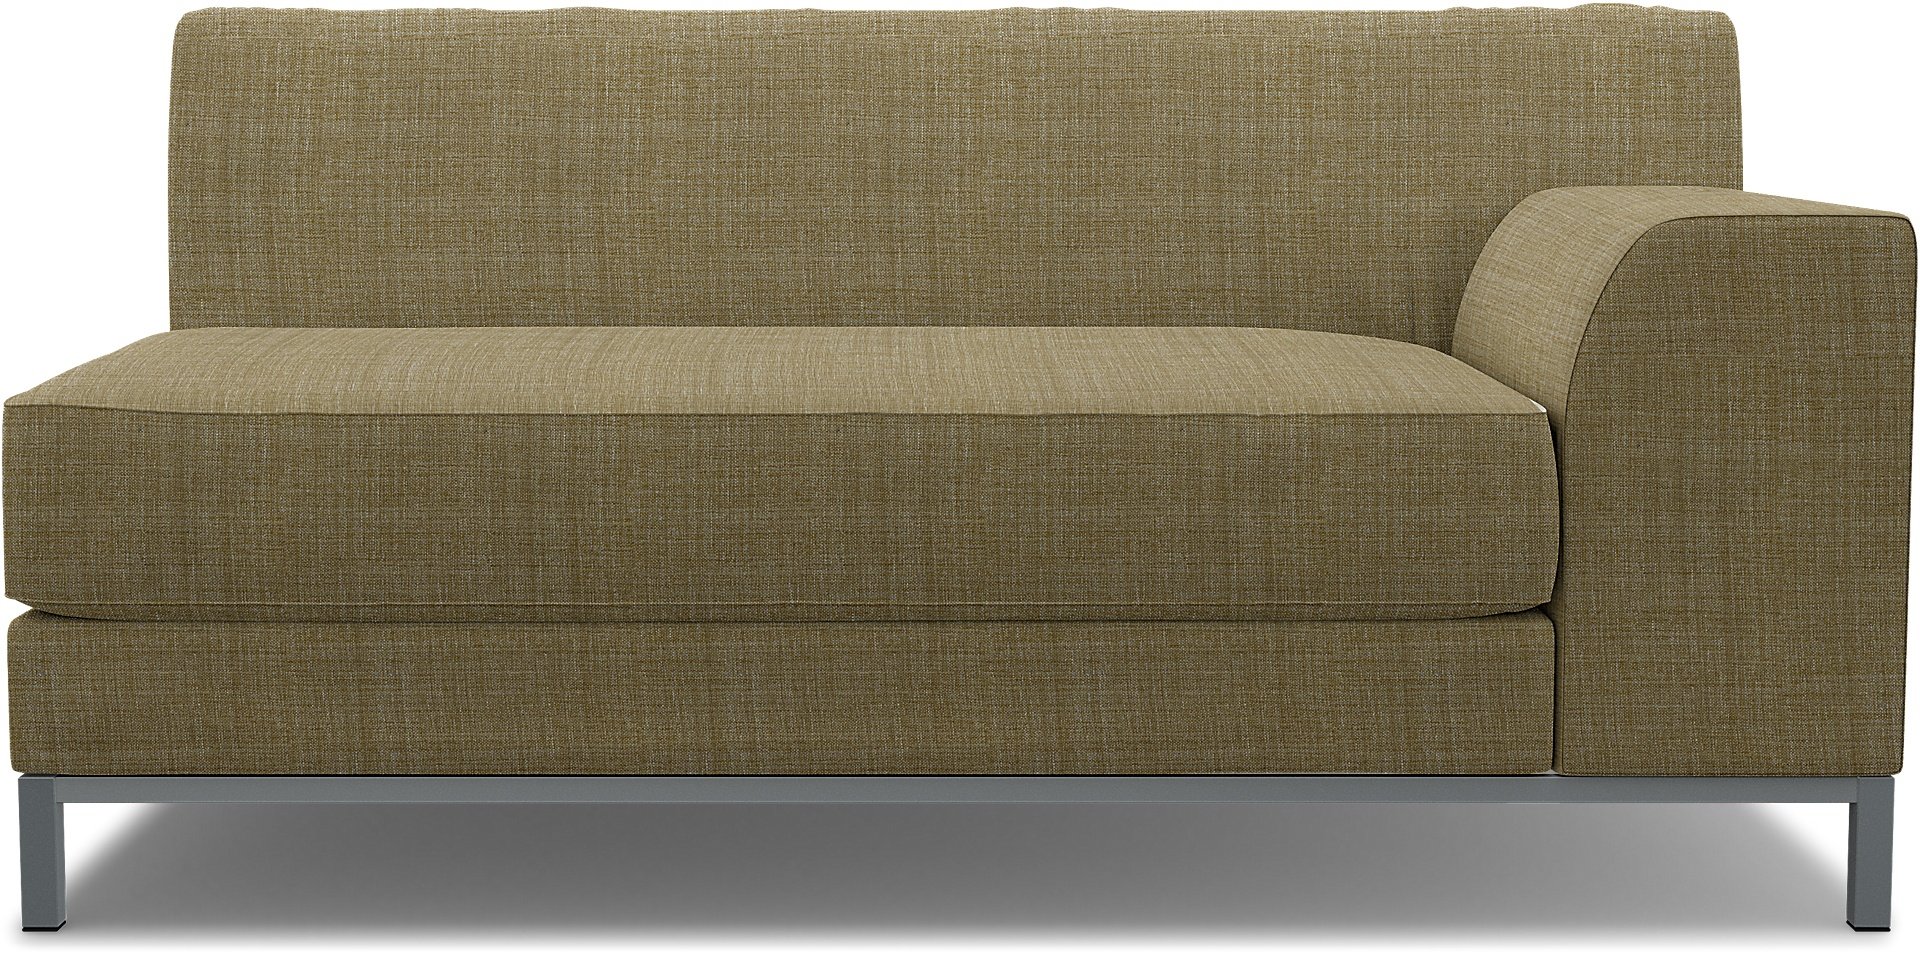 IKEA - Kramfors 2 Seater Sofa with Right Arm Cover, Dusty Yellow, Boucle & Texture - Bemz